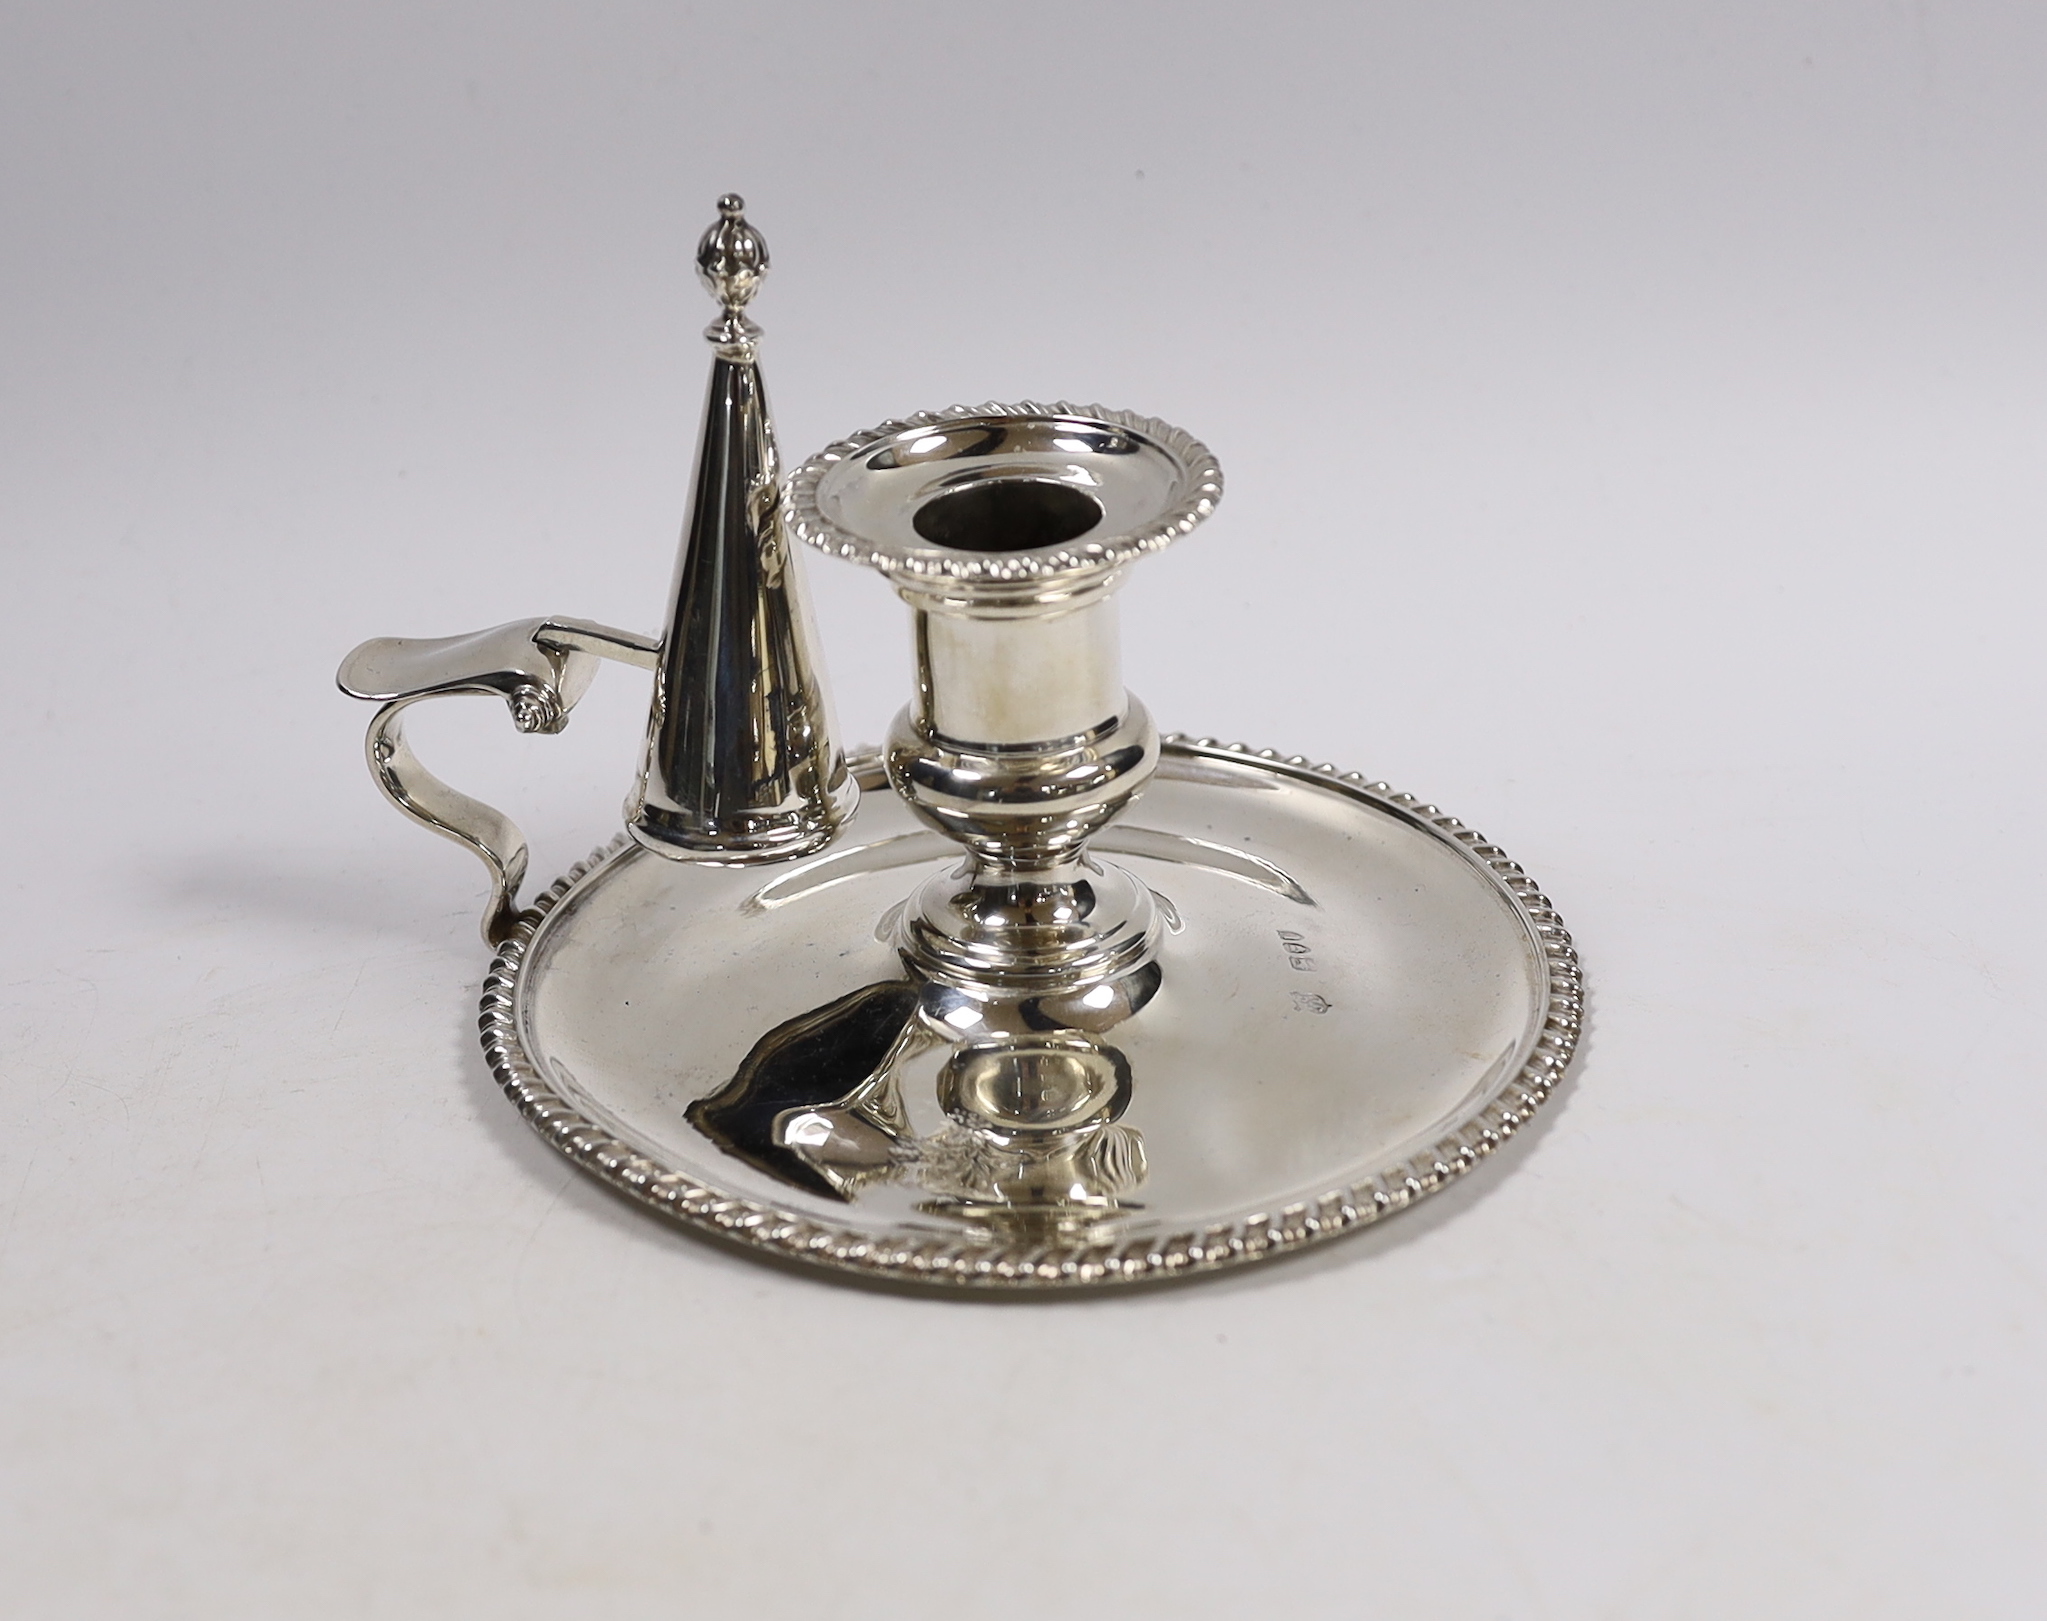 A late Victorian silver chamberstick and matching extinguisher, by Goldsmiths & Silversmiths, London, 1895, with gadrooned border, base diameter 15cm, 9.7oz.